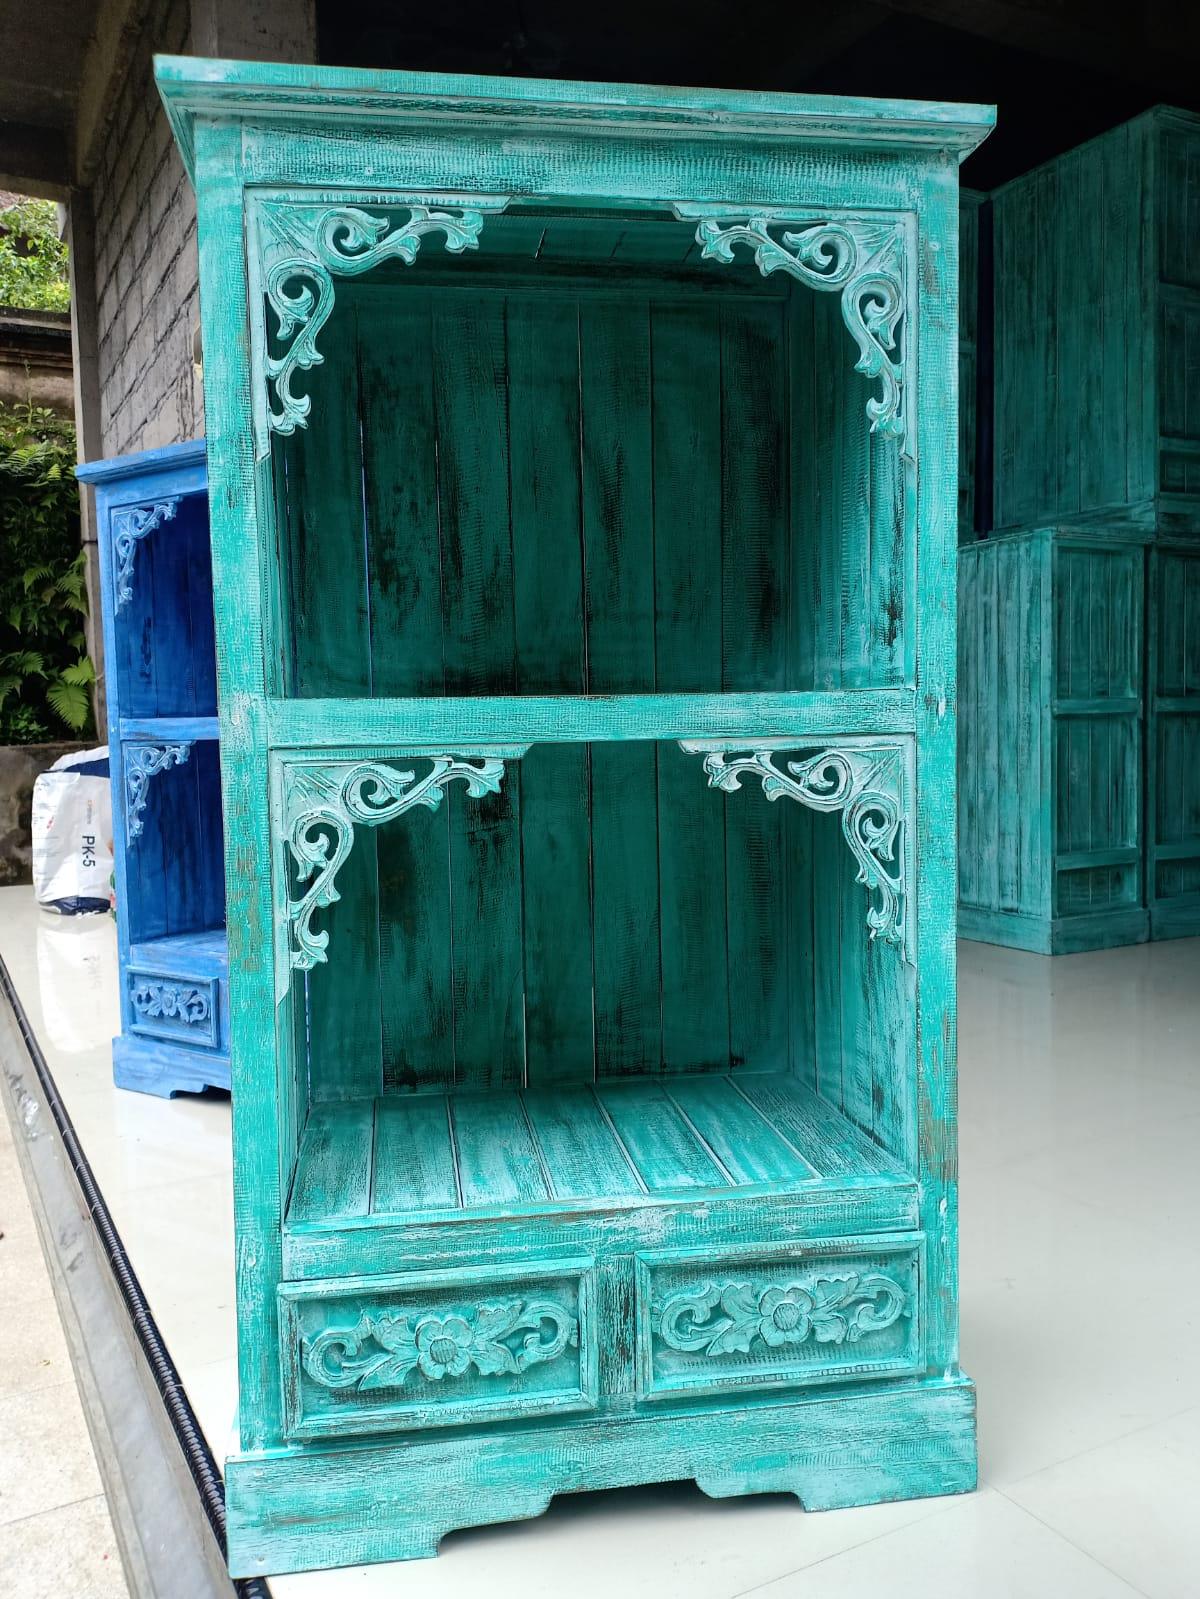 Freestanding Bathroom Cabinet - Turquoise Wash - Charming Spaces